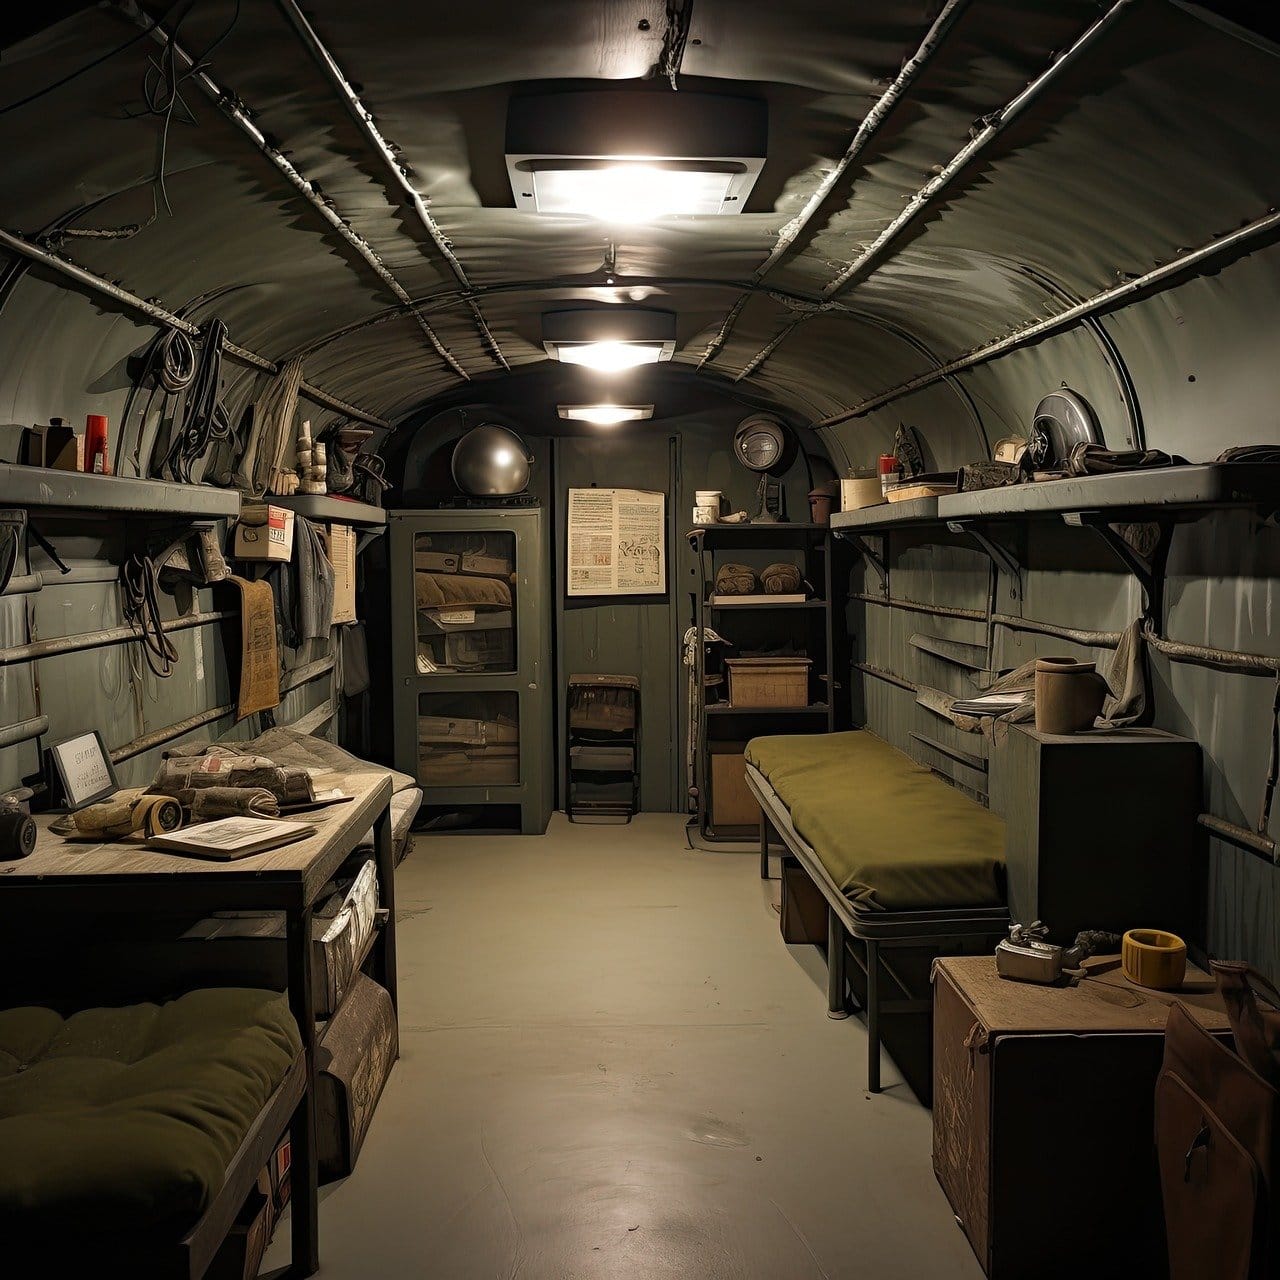 Safe Bomb Shelters, Fallout Shelters, & Underground Bunkers